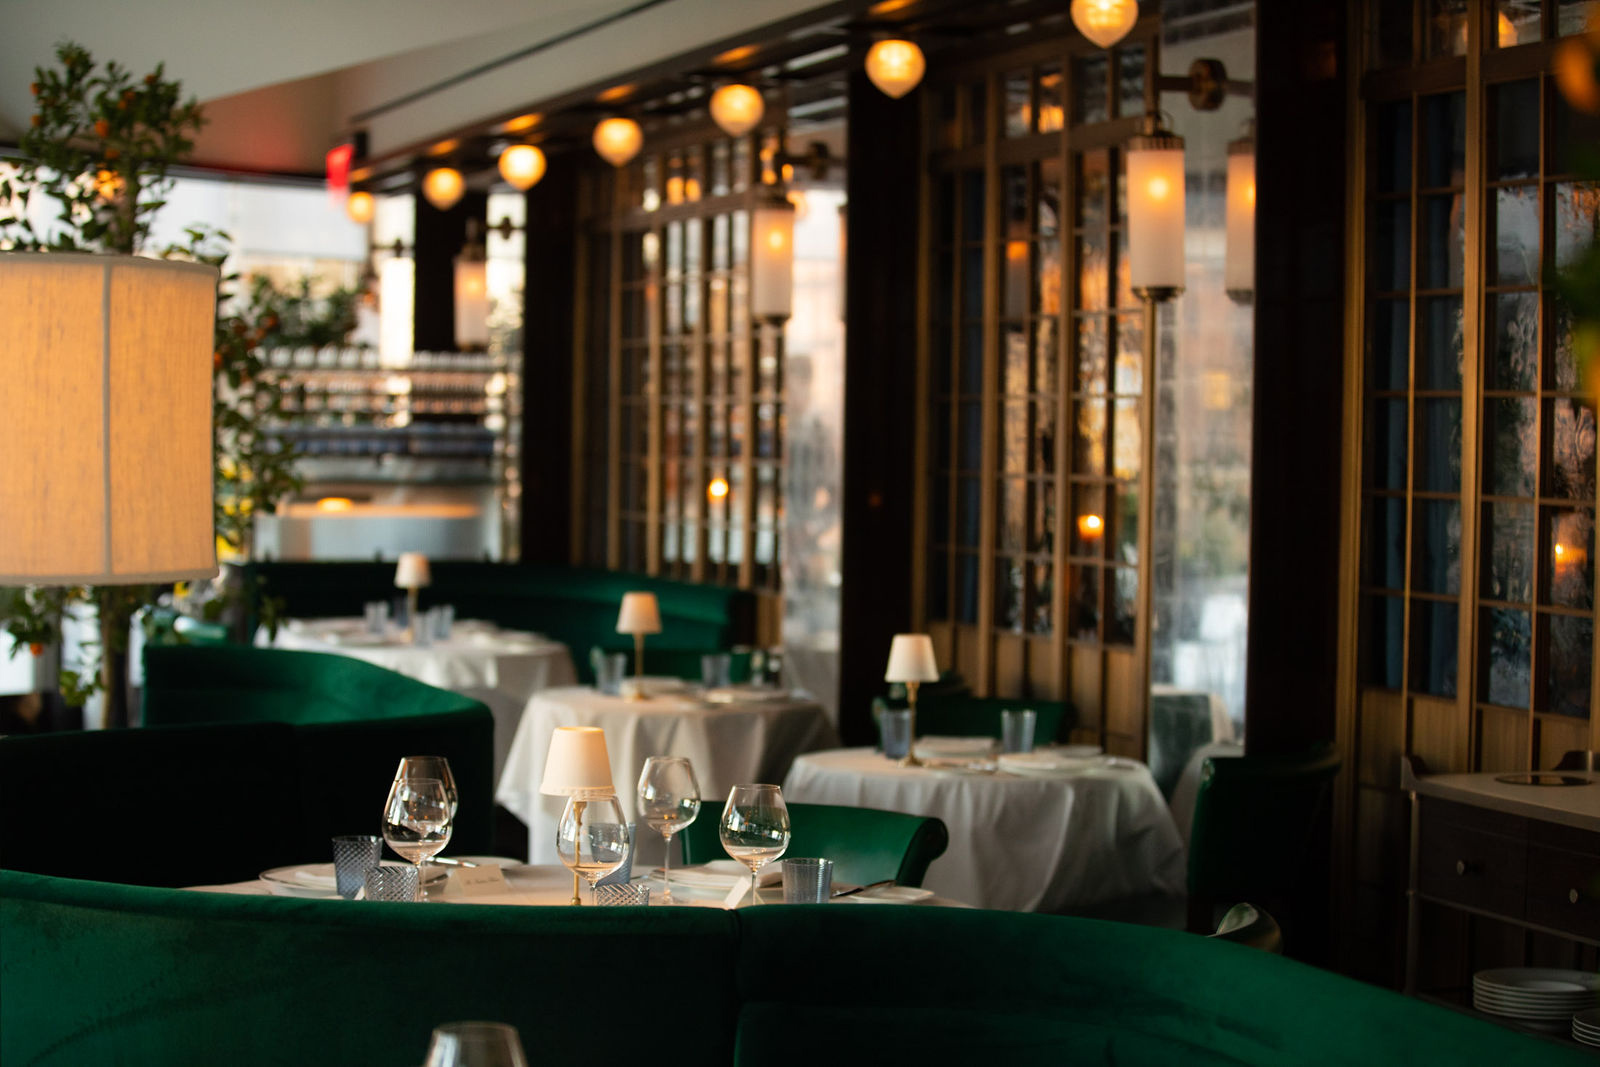 Thomas Keller TakRoom Building a restaurant experience on SquareSpace.